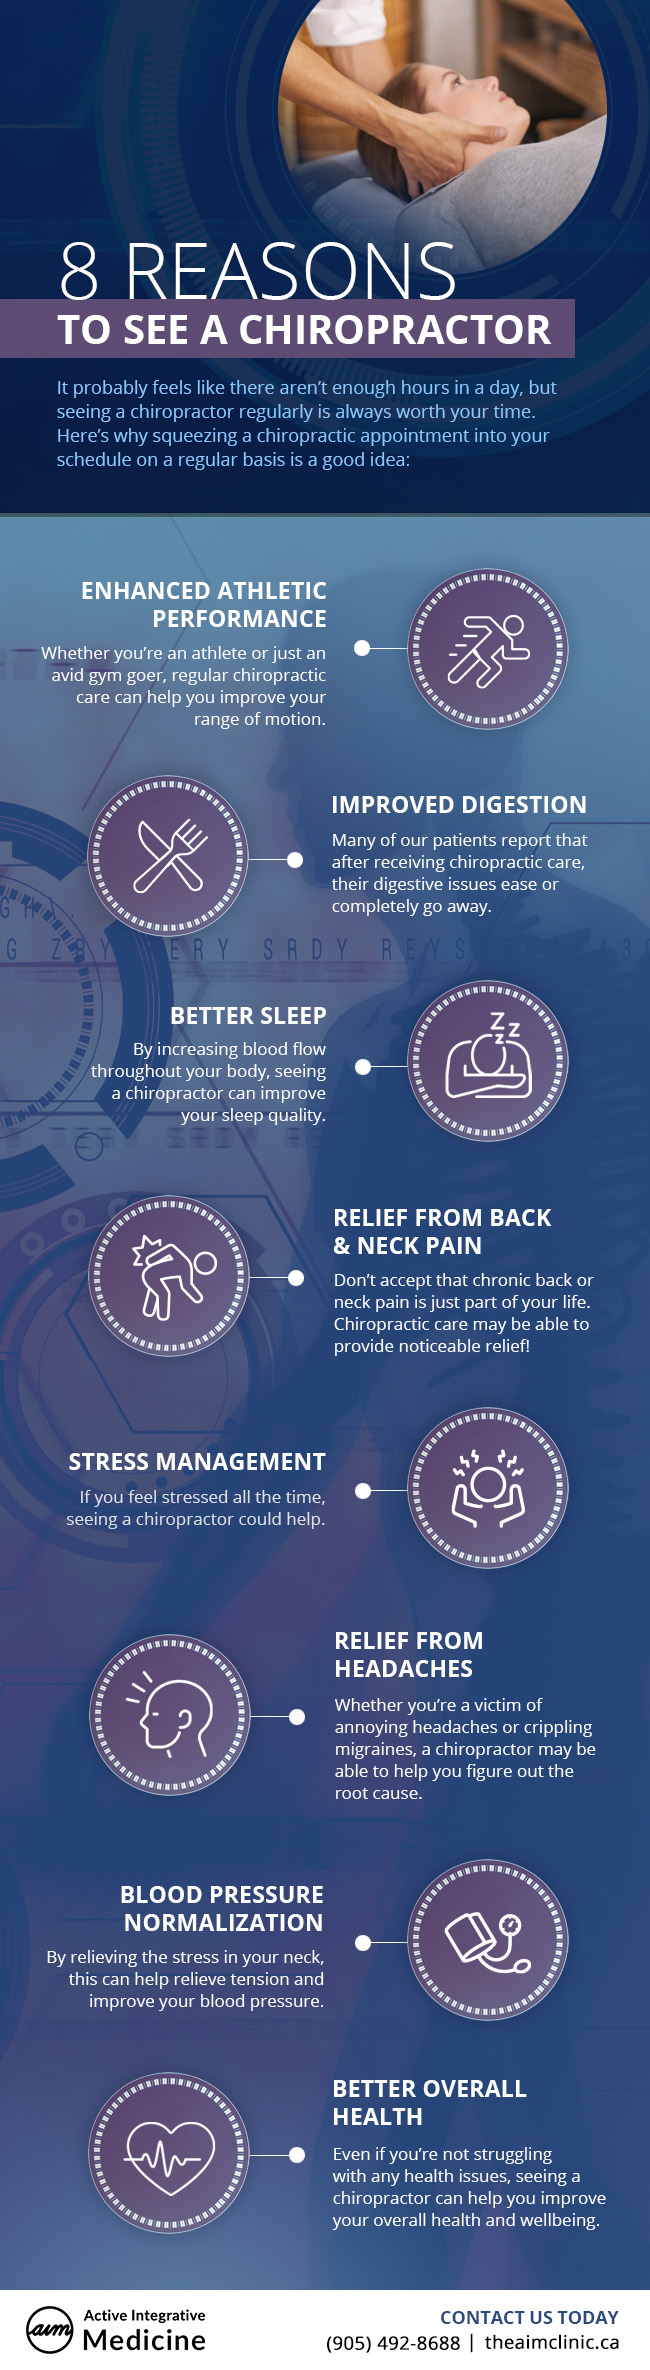 8 Reasons it’s Always Worth it to See a Chiropractor 